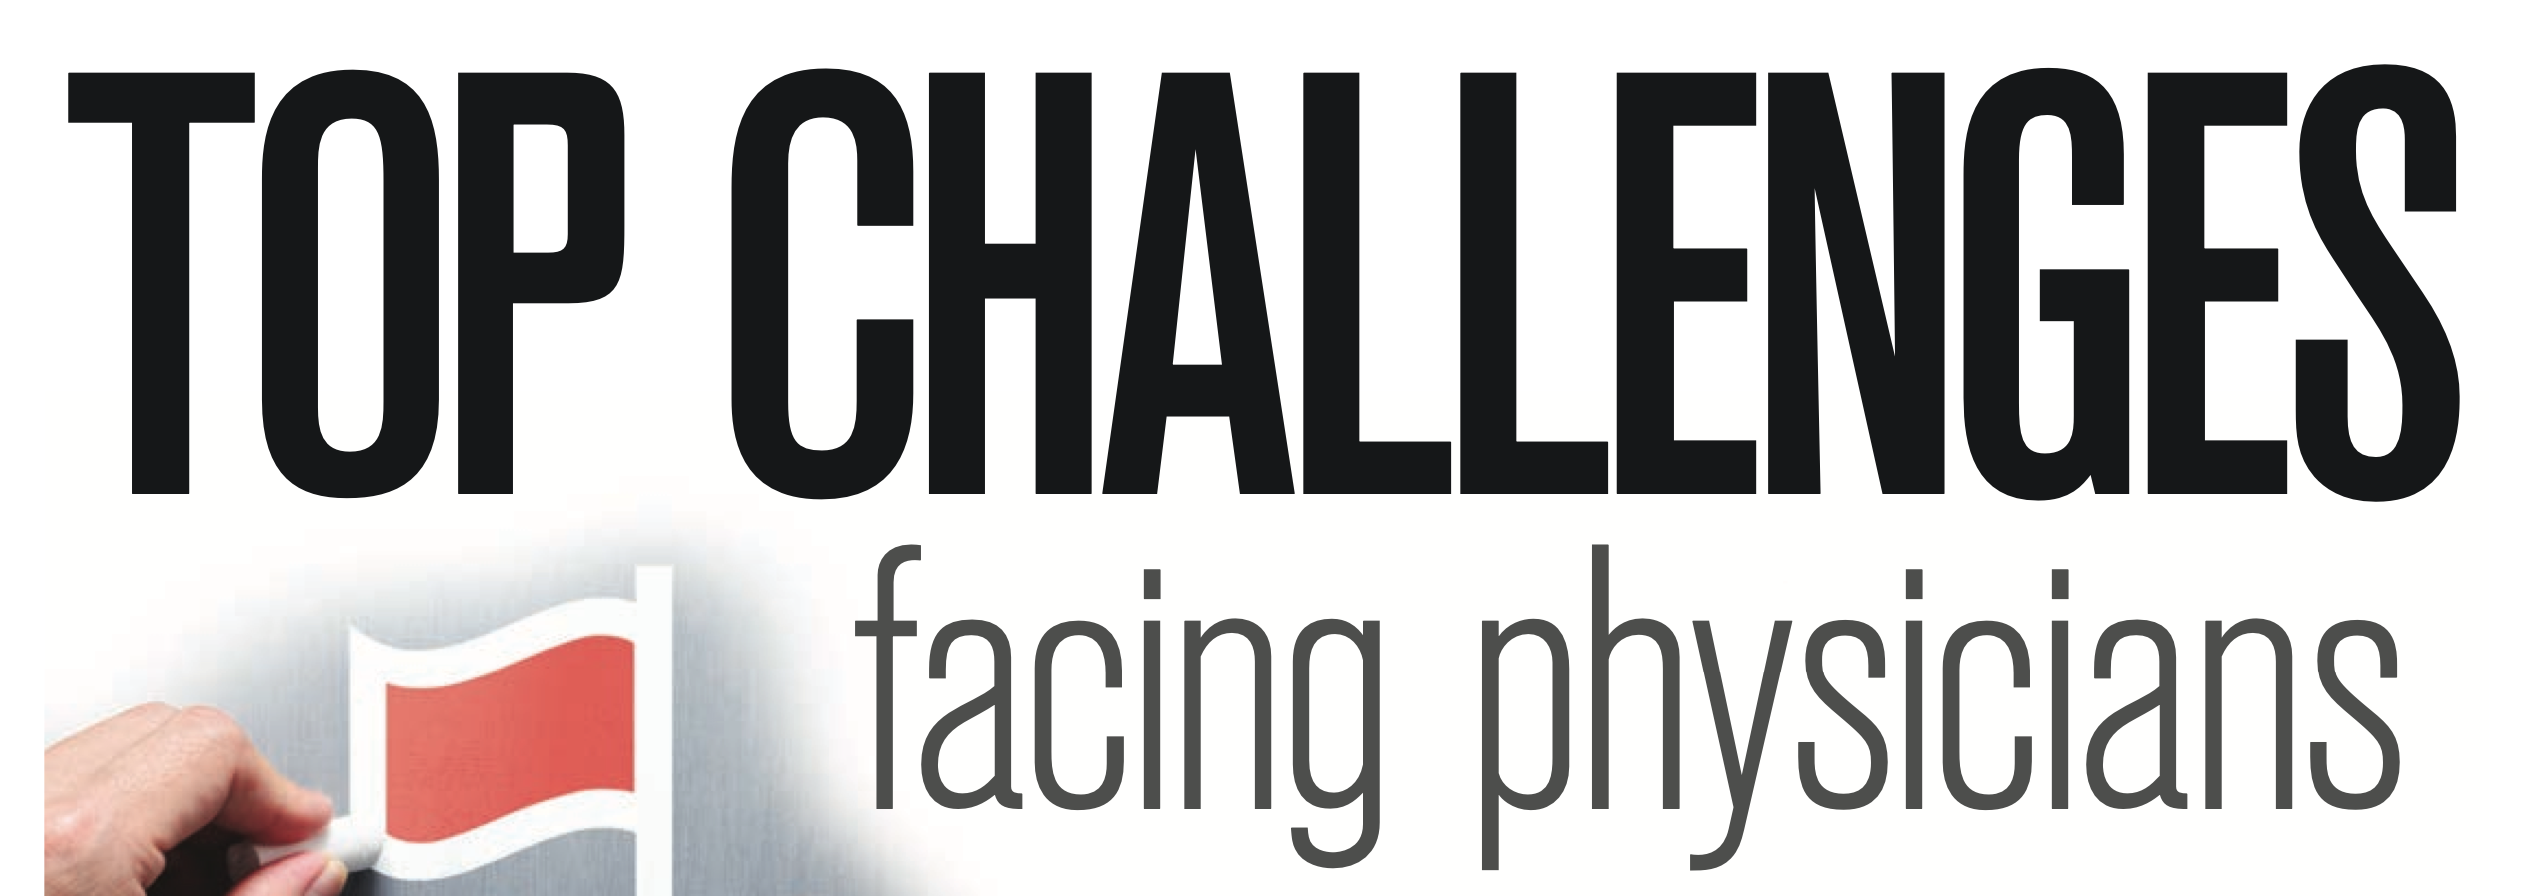 Top challenges facing physicians: Tell us what keeps you up at night